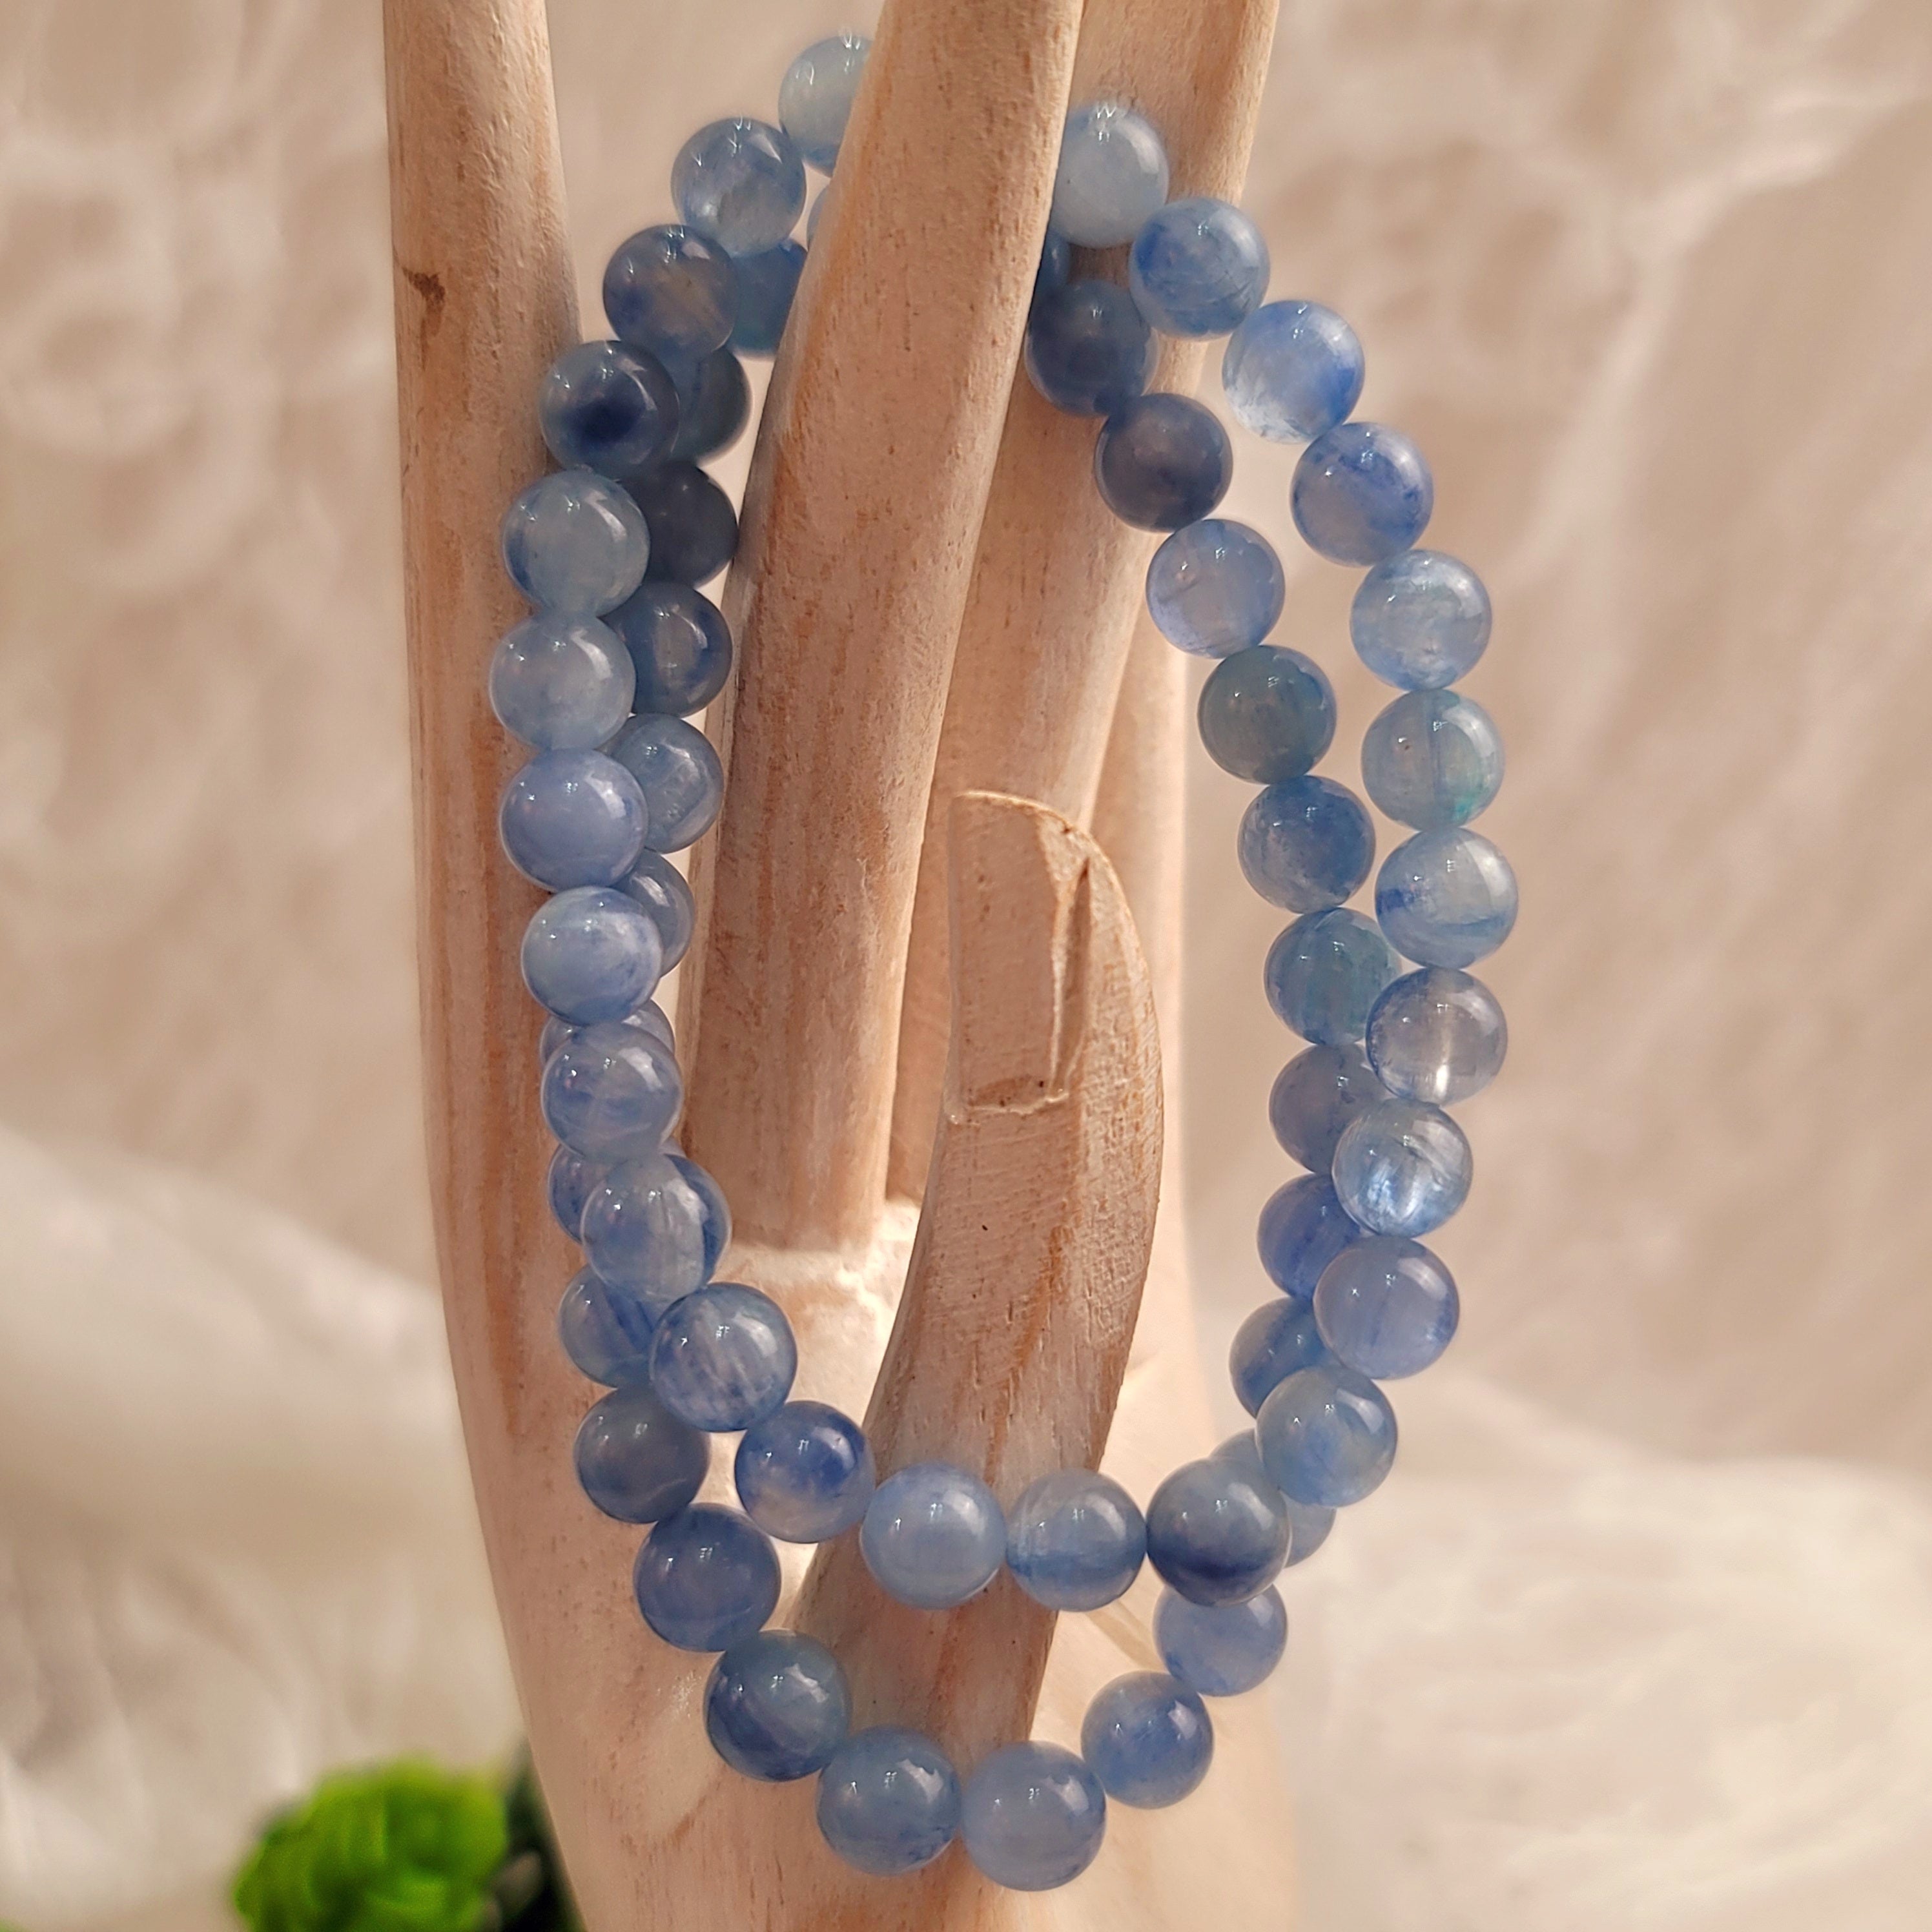 Baby Blue Kyanite Bracelet for Harmony and Overcoming Addiction